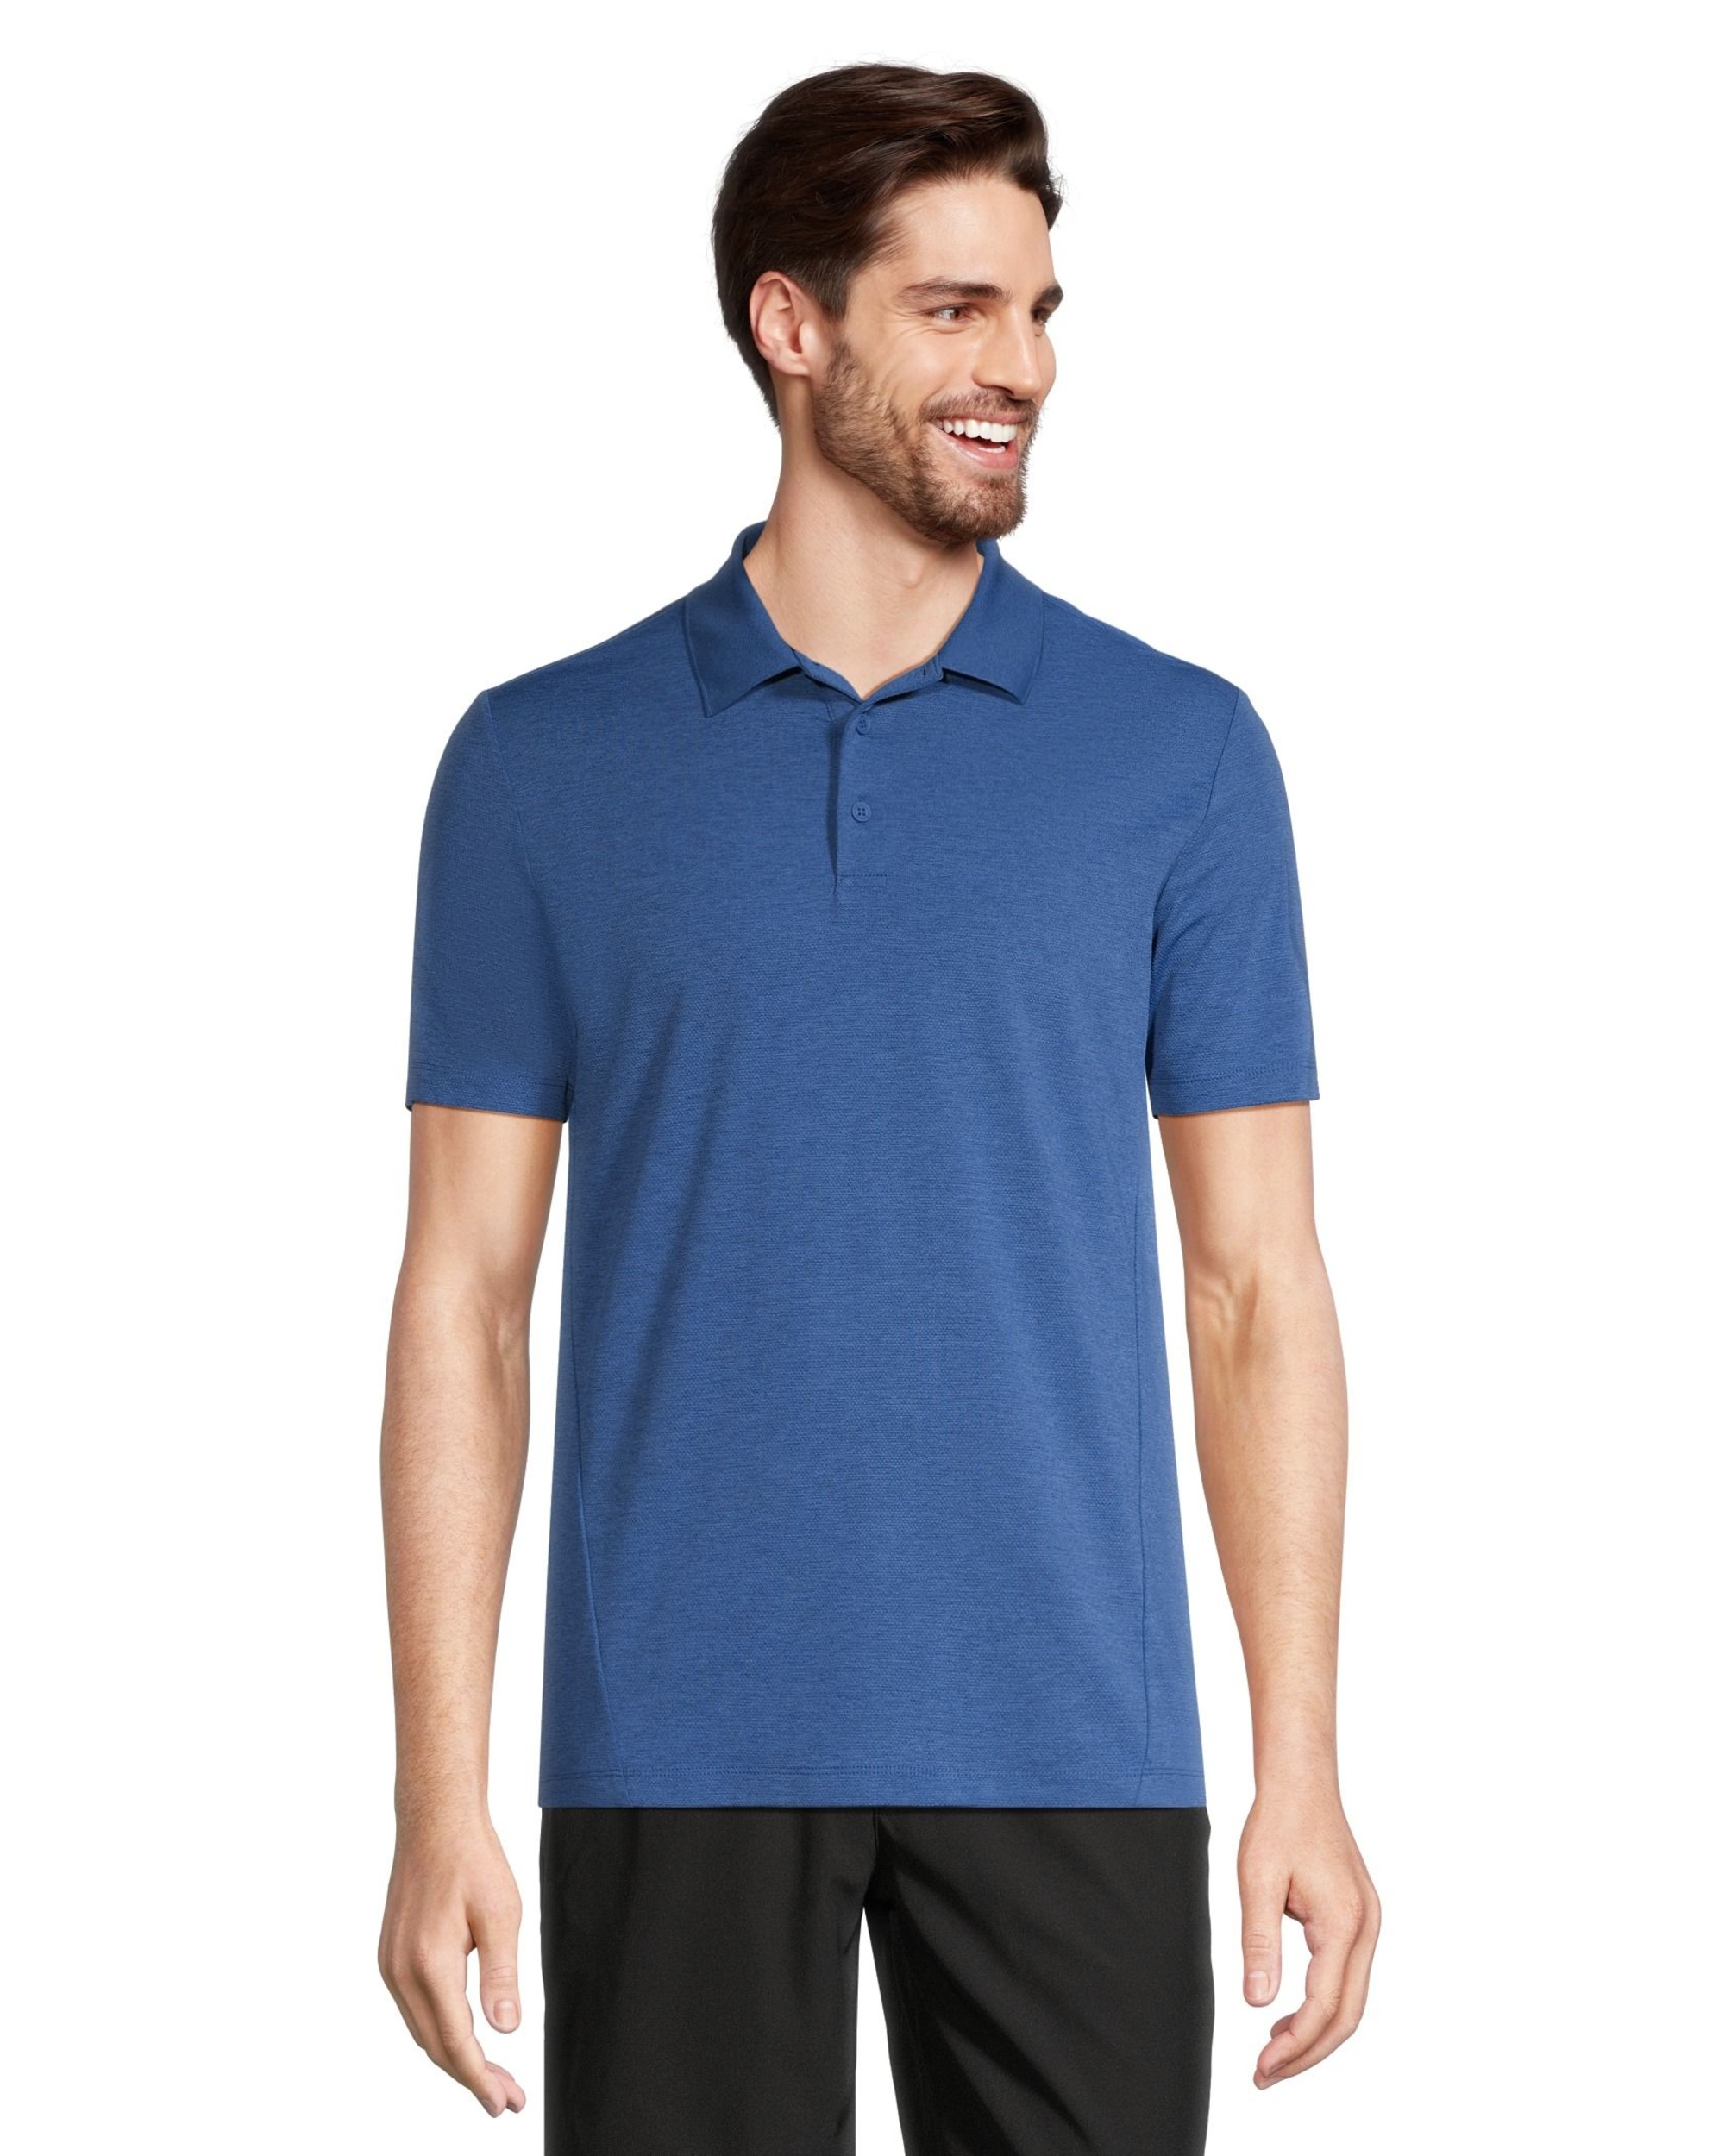 Matrix Men's Perforated Stretch Polo Shirts | Marks